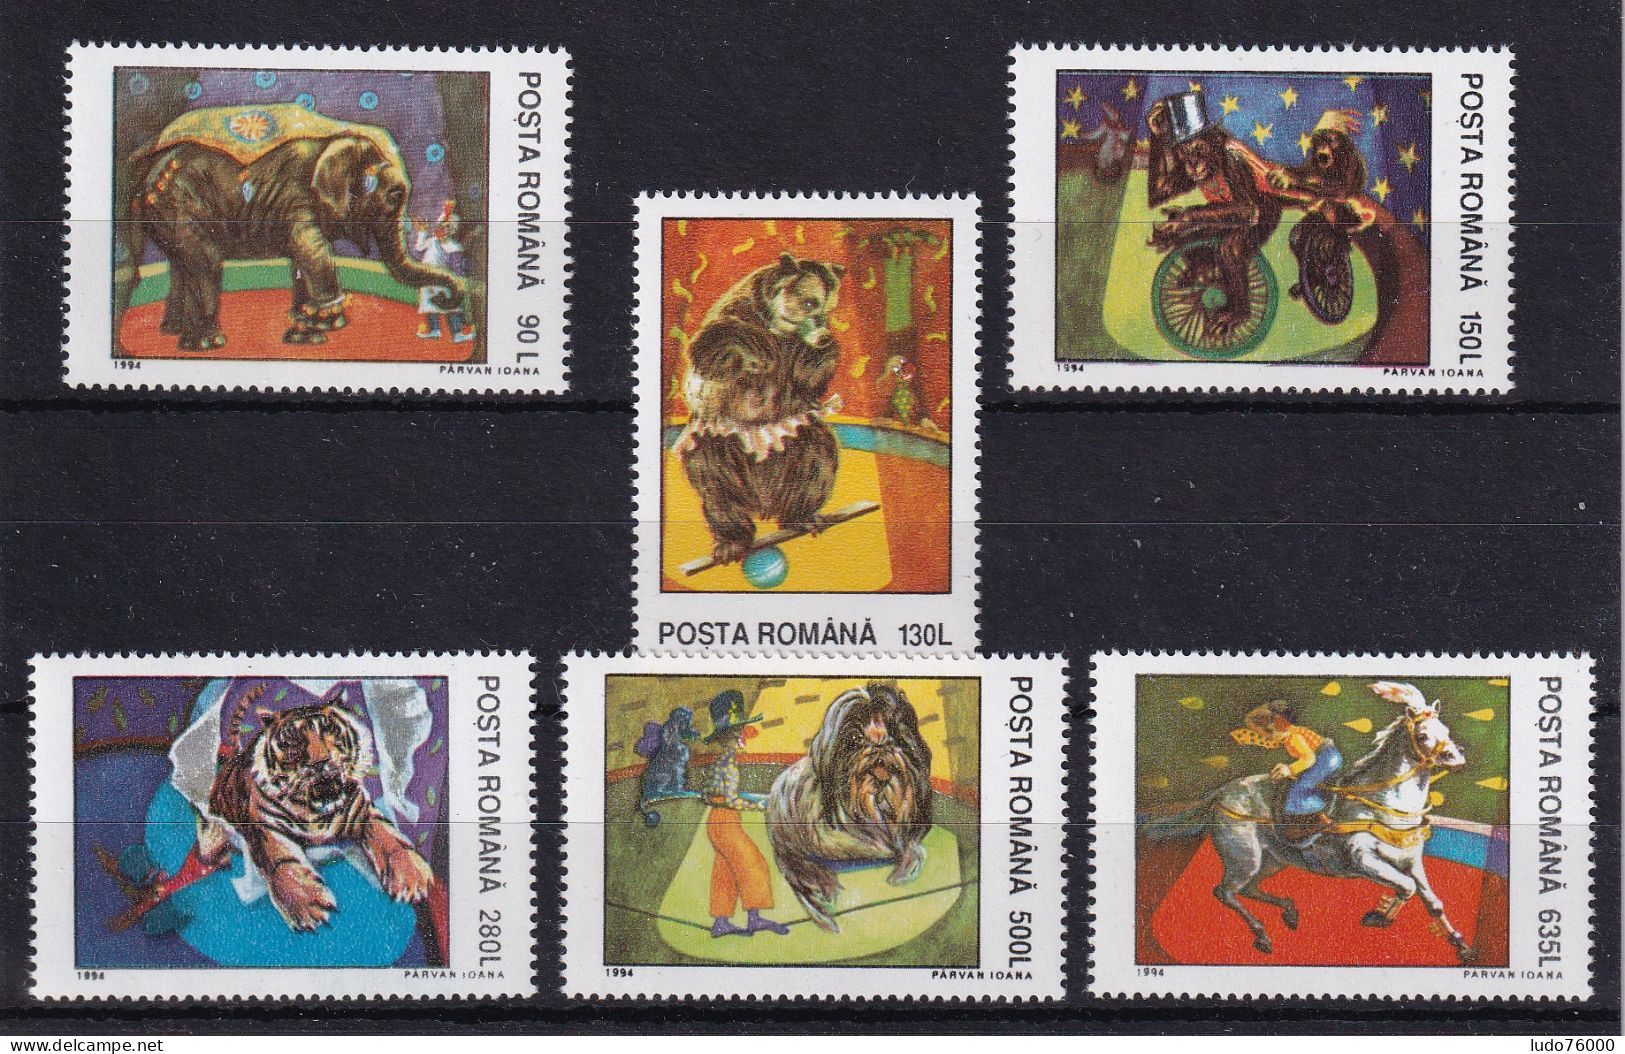 D 785 / ROUMANIE / LOT N° 4192/4197 NEUF** COTE 5.50€ - Collections